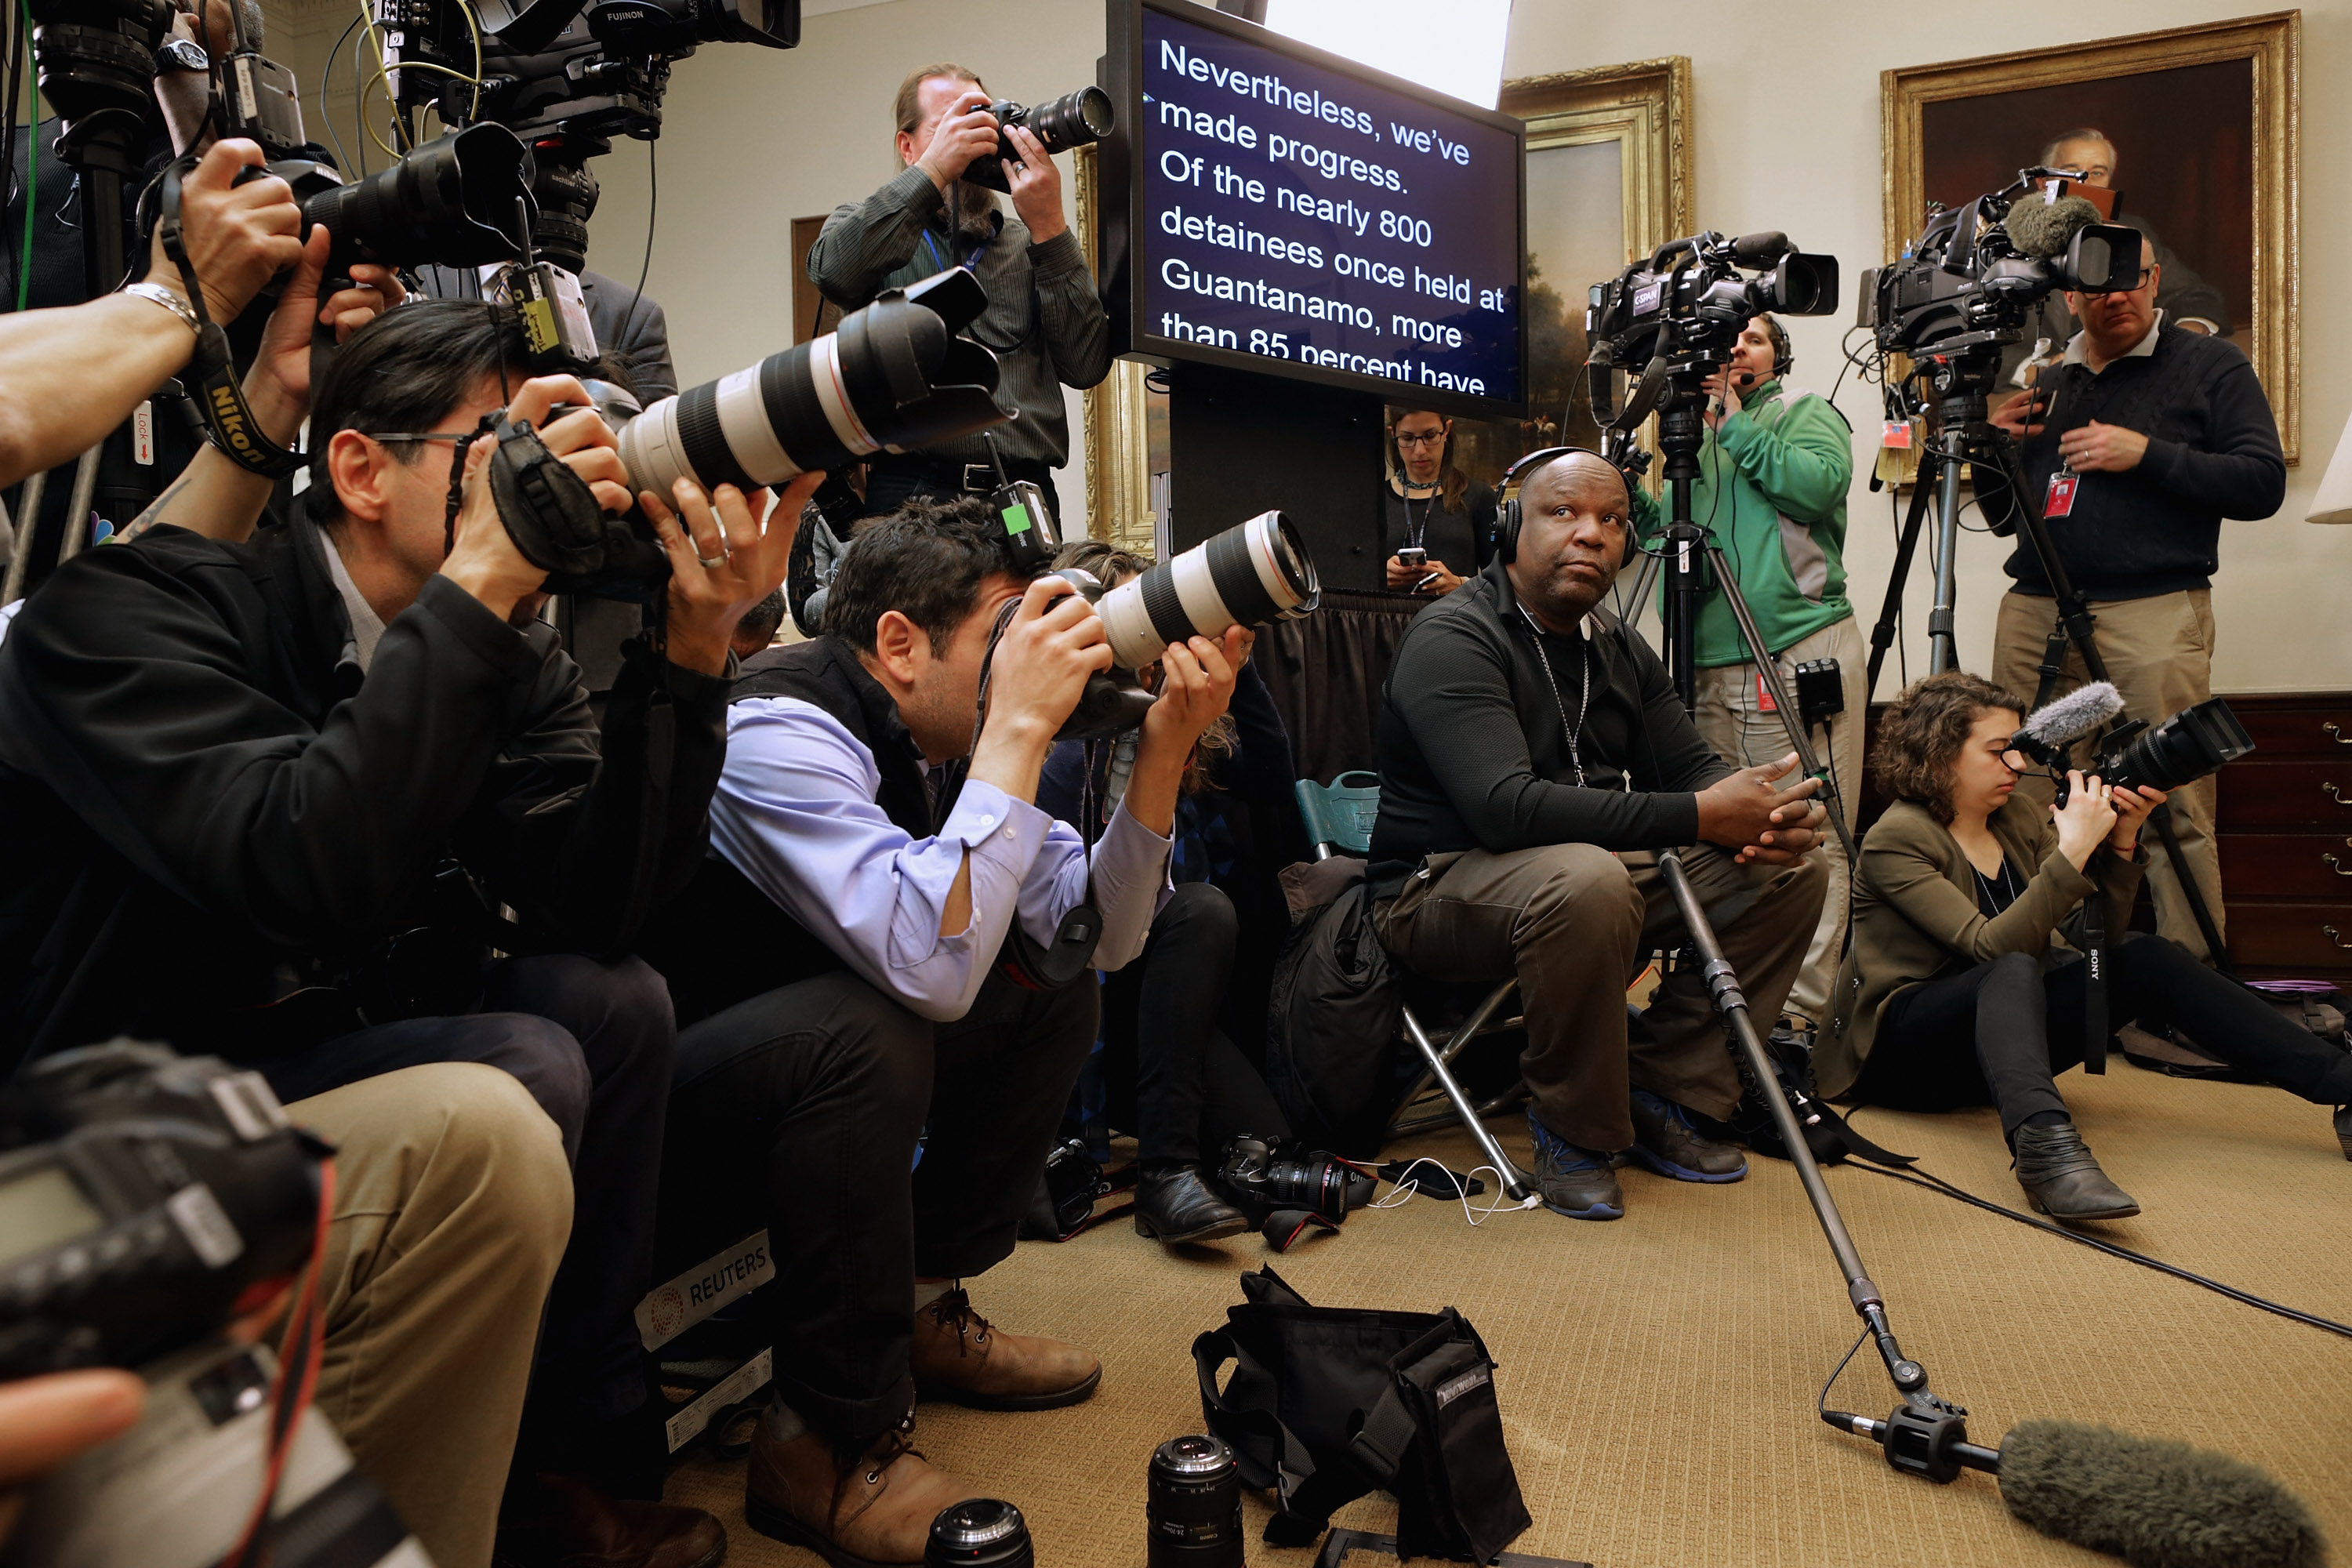 WASHINGTON, DC - FEBRUARY 23:  Journalists cover President Barack Obama making a statement about his plan to close the detention camp at the Guantanamo Bay Naval Base and relocate the terrorism suspects there to the United States in the Roosevelt Room at the White House February 23, 2016 in Washington, DC. Attempting to follow through with a campaign pledge he made in 2008, Obama will continue to face an uphill battle to close the prison in Cuba because of strong opposition to the plan by congressional Republicans.  (Photo by Chip Somodevilla/Getty Images)